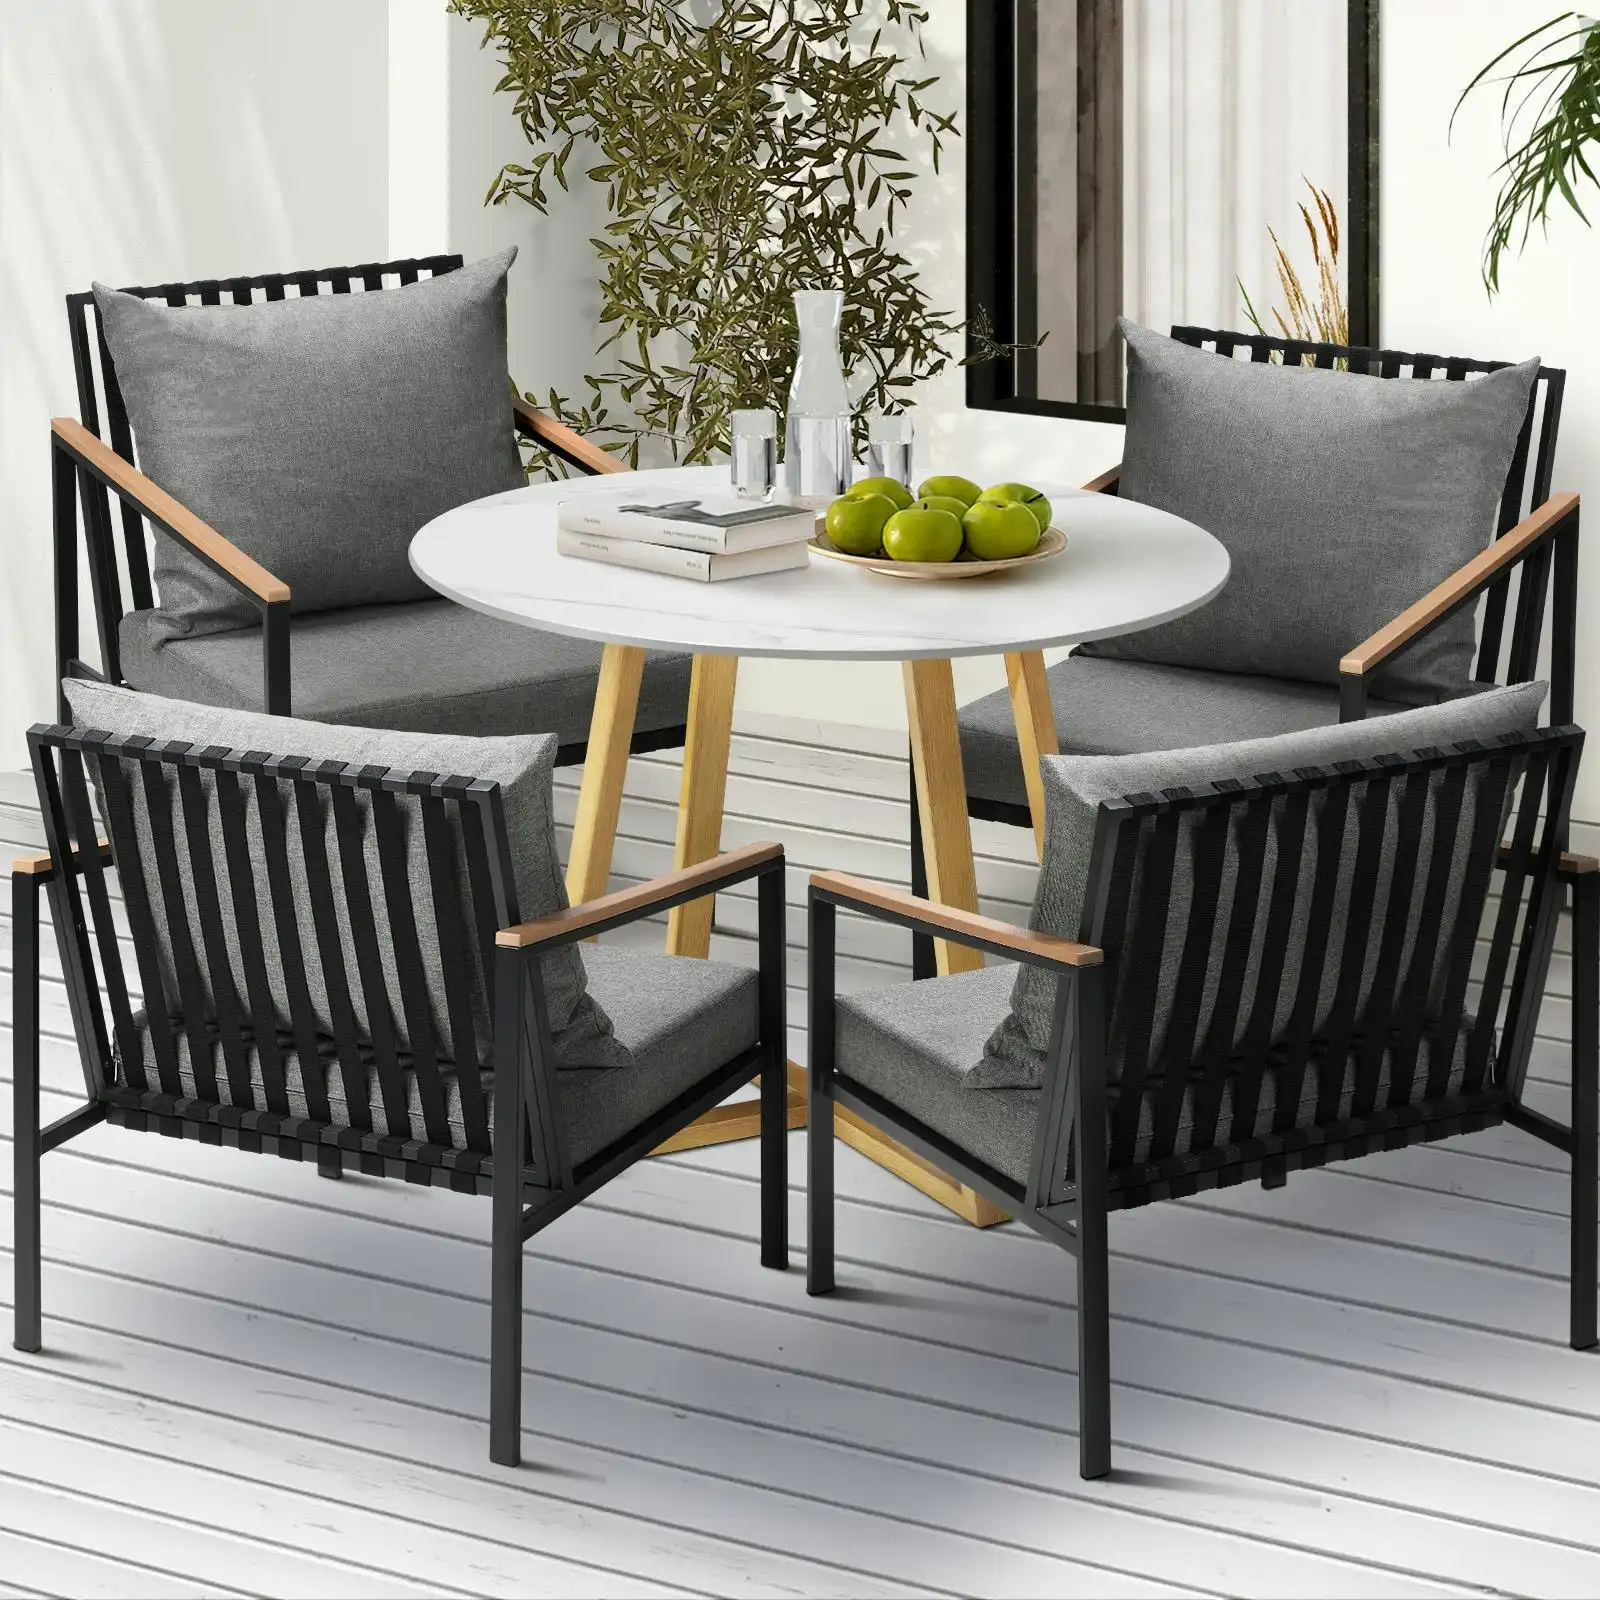 Livsip 5 Piece Outdoor Dining Setting Sintered Stone Table Patio Furniture Set